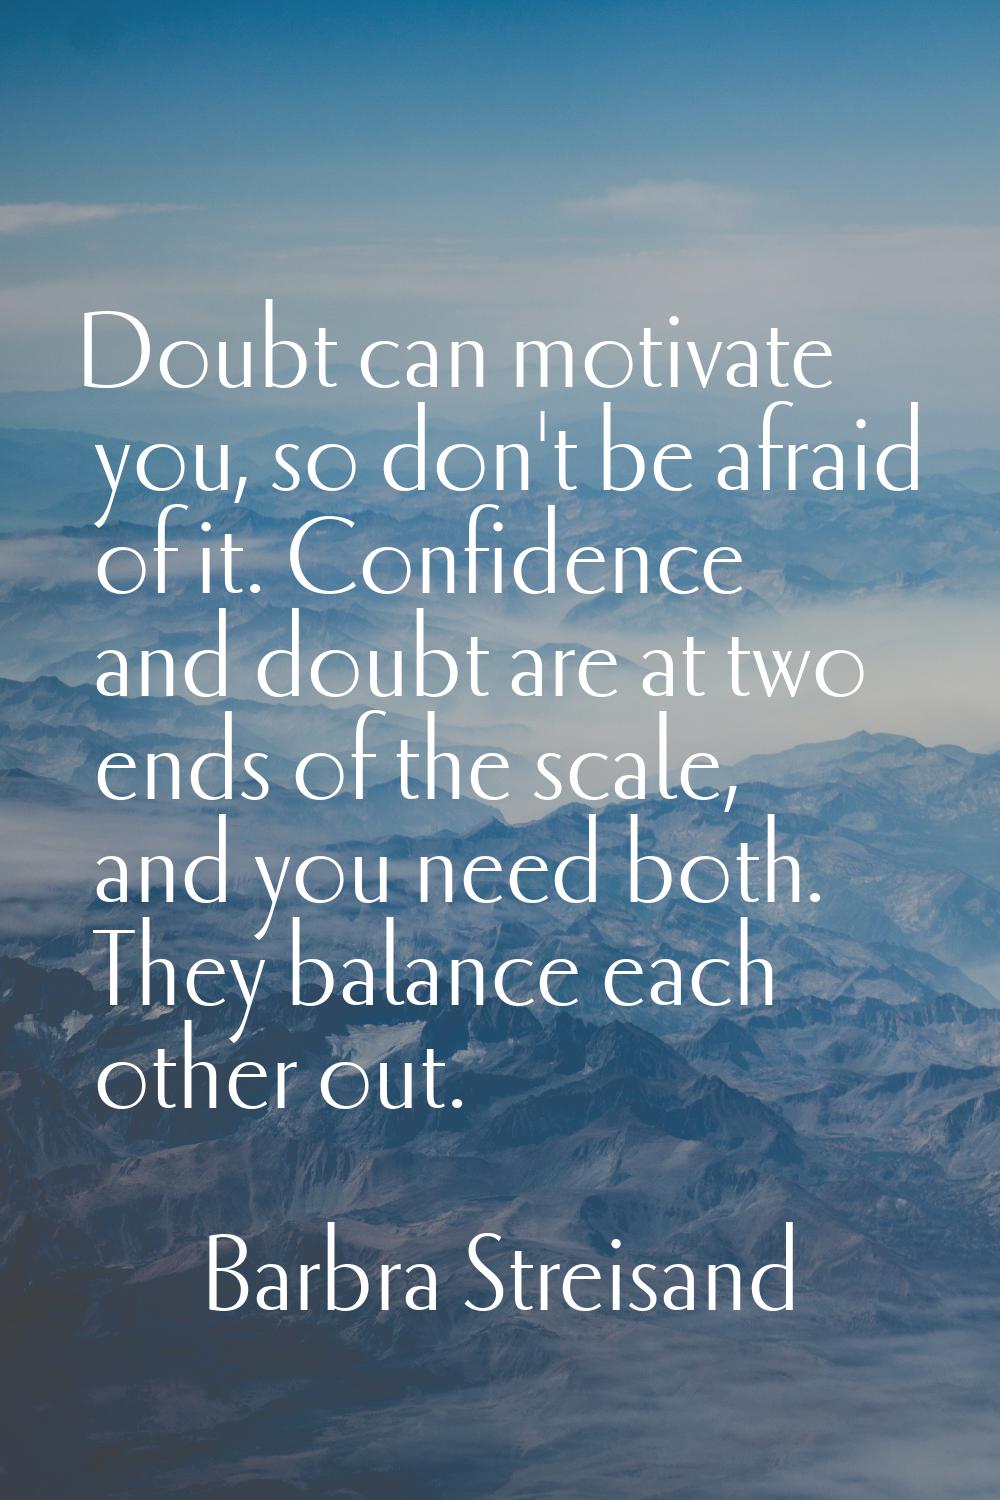 Doubt can motivate you, so don't be afraid of it. Confidence and doubt are at two ends of the scale